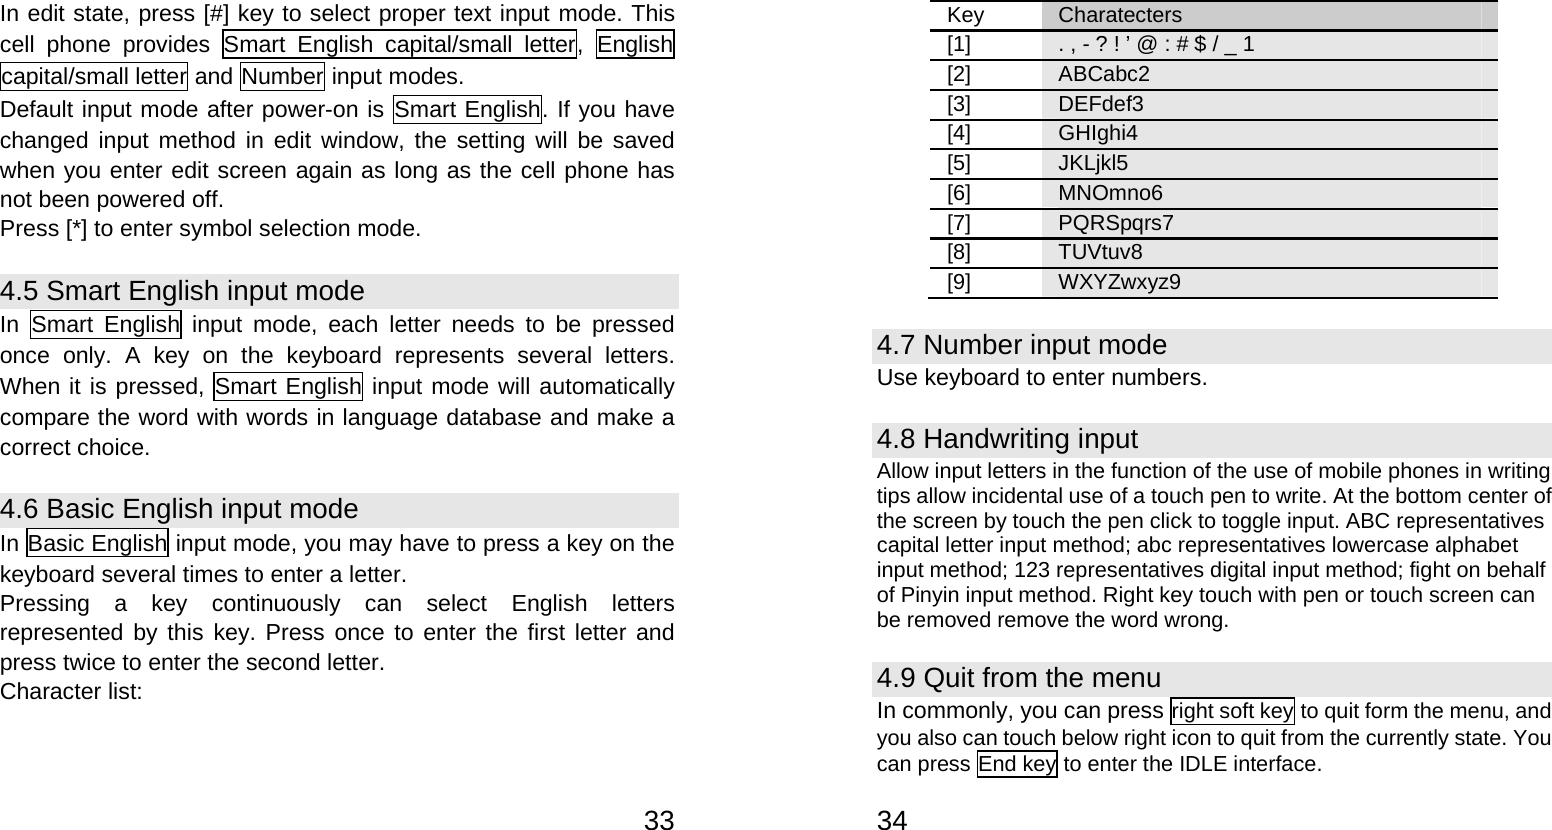   33In edit state, press [#] key to select proper text input mode. This cell phone provides Smart English capital/small letter, English capital/small letter and Number input modes. Default input mode after power-on is Smart English. If you have changed input method in edit window, the setting will be saved when you enter edit screen again as long as the cell phone has not been powered off.   Press [*] to enter symbol selection mode. 4.5 Smart English input mode   In Smart English input mode, each letter needs to be pressed once only. A key on the keyboard represents several letters. When it is pressed, Smart English input mode will automatically compare the word with words in language database and make a correct choice. 4.6 Basic English input mode   In Basic English input mode, you may have to press a key on the keyboard several times to enter a letter. Pressing a key continuously can select English letters represented by this key. Press once to enter the first letter and press twice to enter the second letter. Character list:     34Key  Charatecters [1]  . , - ? ! ’ @ : # $ / _ 1 [2]  ABCabc2 [3]  DEFdef3 [4]  GHIghi4 [5]  JKLjkl5 [6]  MNOmno6 [7]  PQRSpqrs7 [8]  TUVtuv8 [9]  WXYZwxyz9 4.7 Number input mode Use keyboard to enter numbers. 4.8 Handwriting input Allow input letters in the function of the use of mobile phones in writing tips allow incidental use of a touch pen to write. At the bottom center of the screen by touch the pen click to toggle input. ABC representatives capital letter input method; abc representatives lowercase alphabet input method; 123 representatives digital input method; fight on behalf of Pinyin input method. Right key touch with pen or touch screen can be removed remove the word wrong. 4.9 Quit from the menu In commonly, you can press right soft key to quit form the menu, and you also can touch below right icon to quit from the currently state. You can press End key to enter the IDLE interface. 